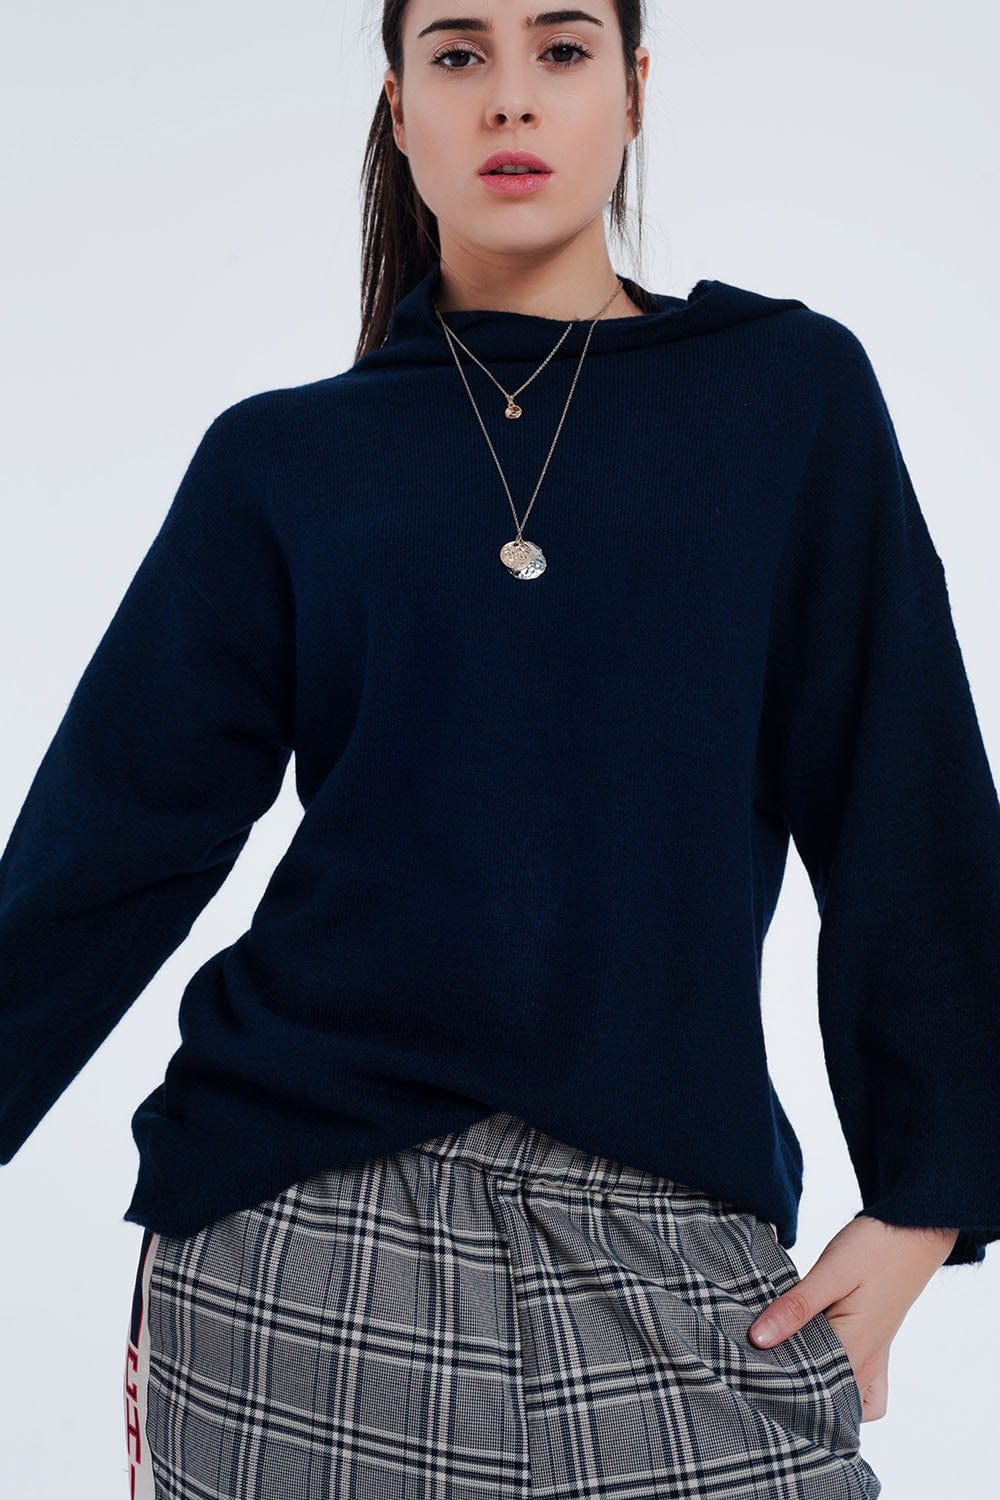 Q2 Women's Sweater Navy Blue Sweater with Wide Sleeves